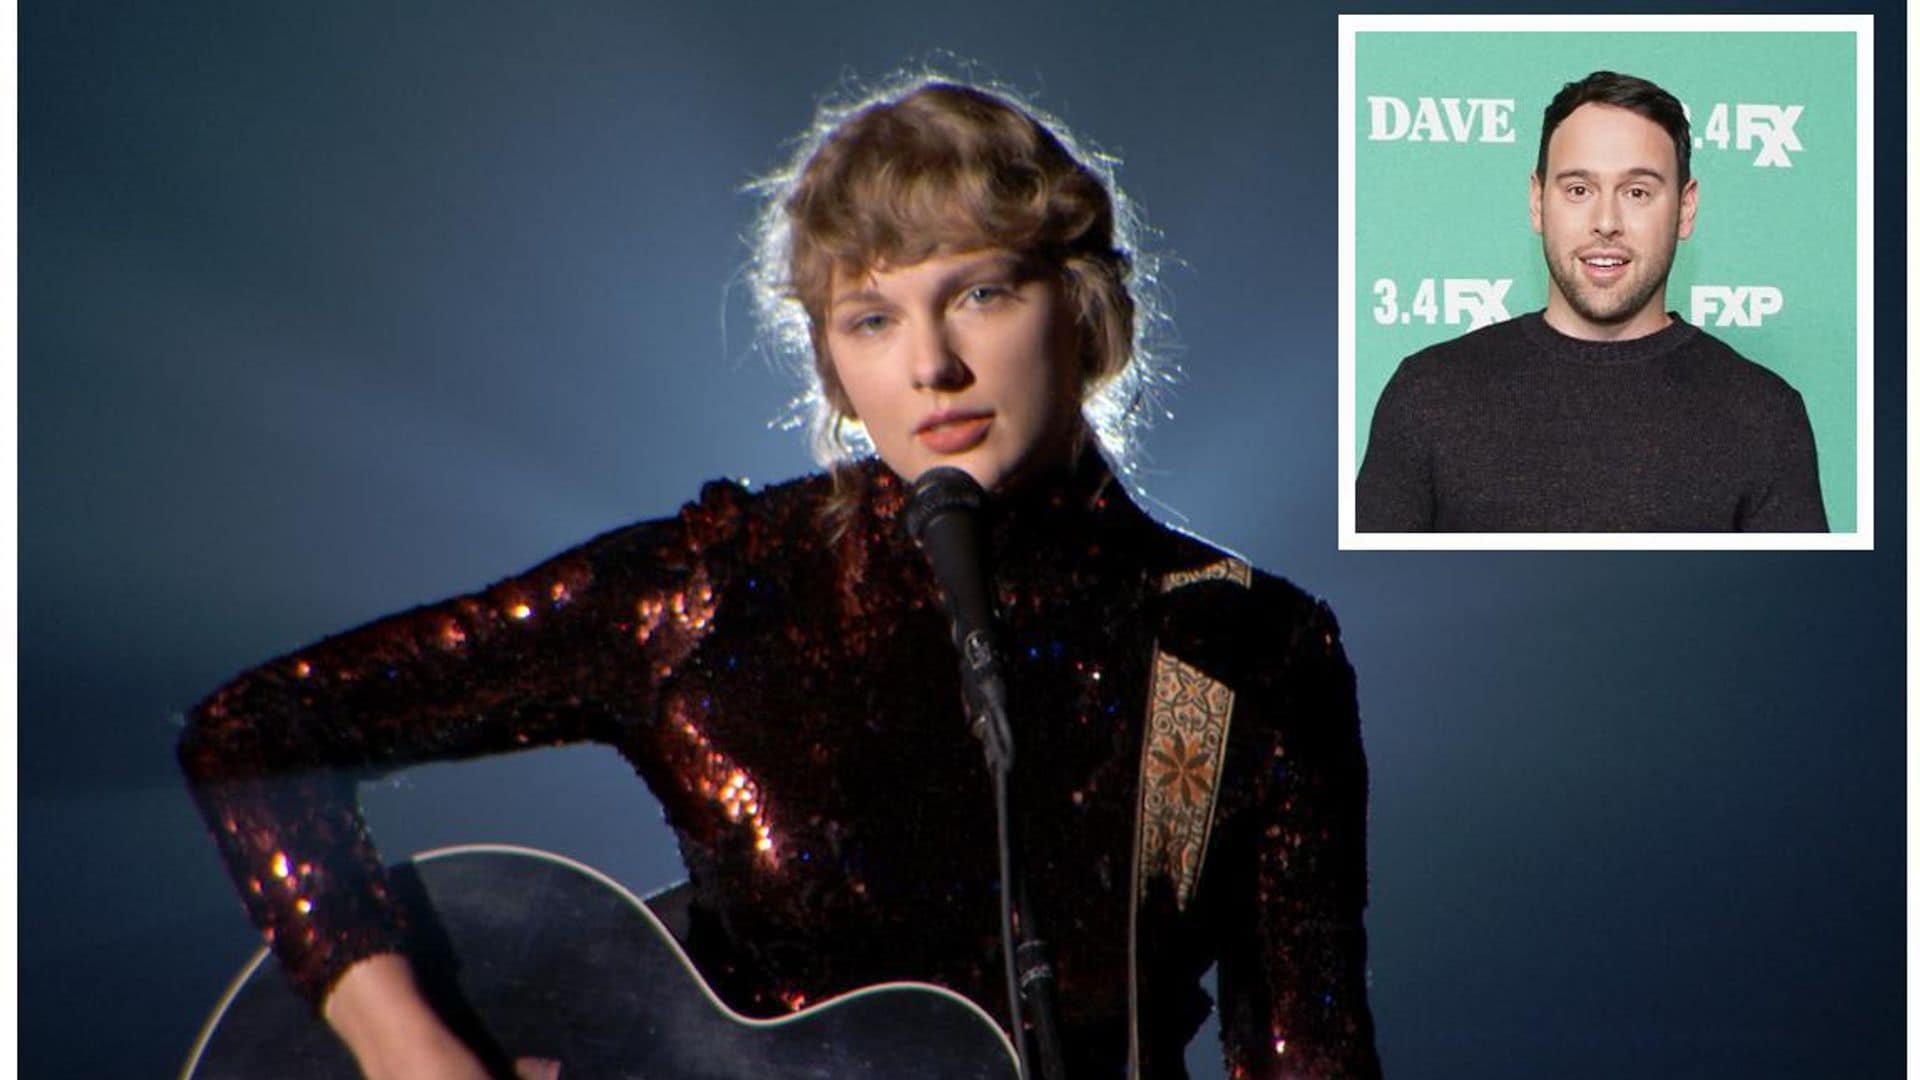 Taylor Swift responds to news that Scooter Braun sold the master rights to her music for over $300 million